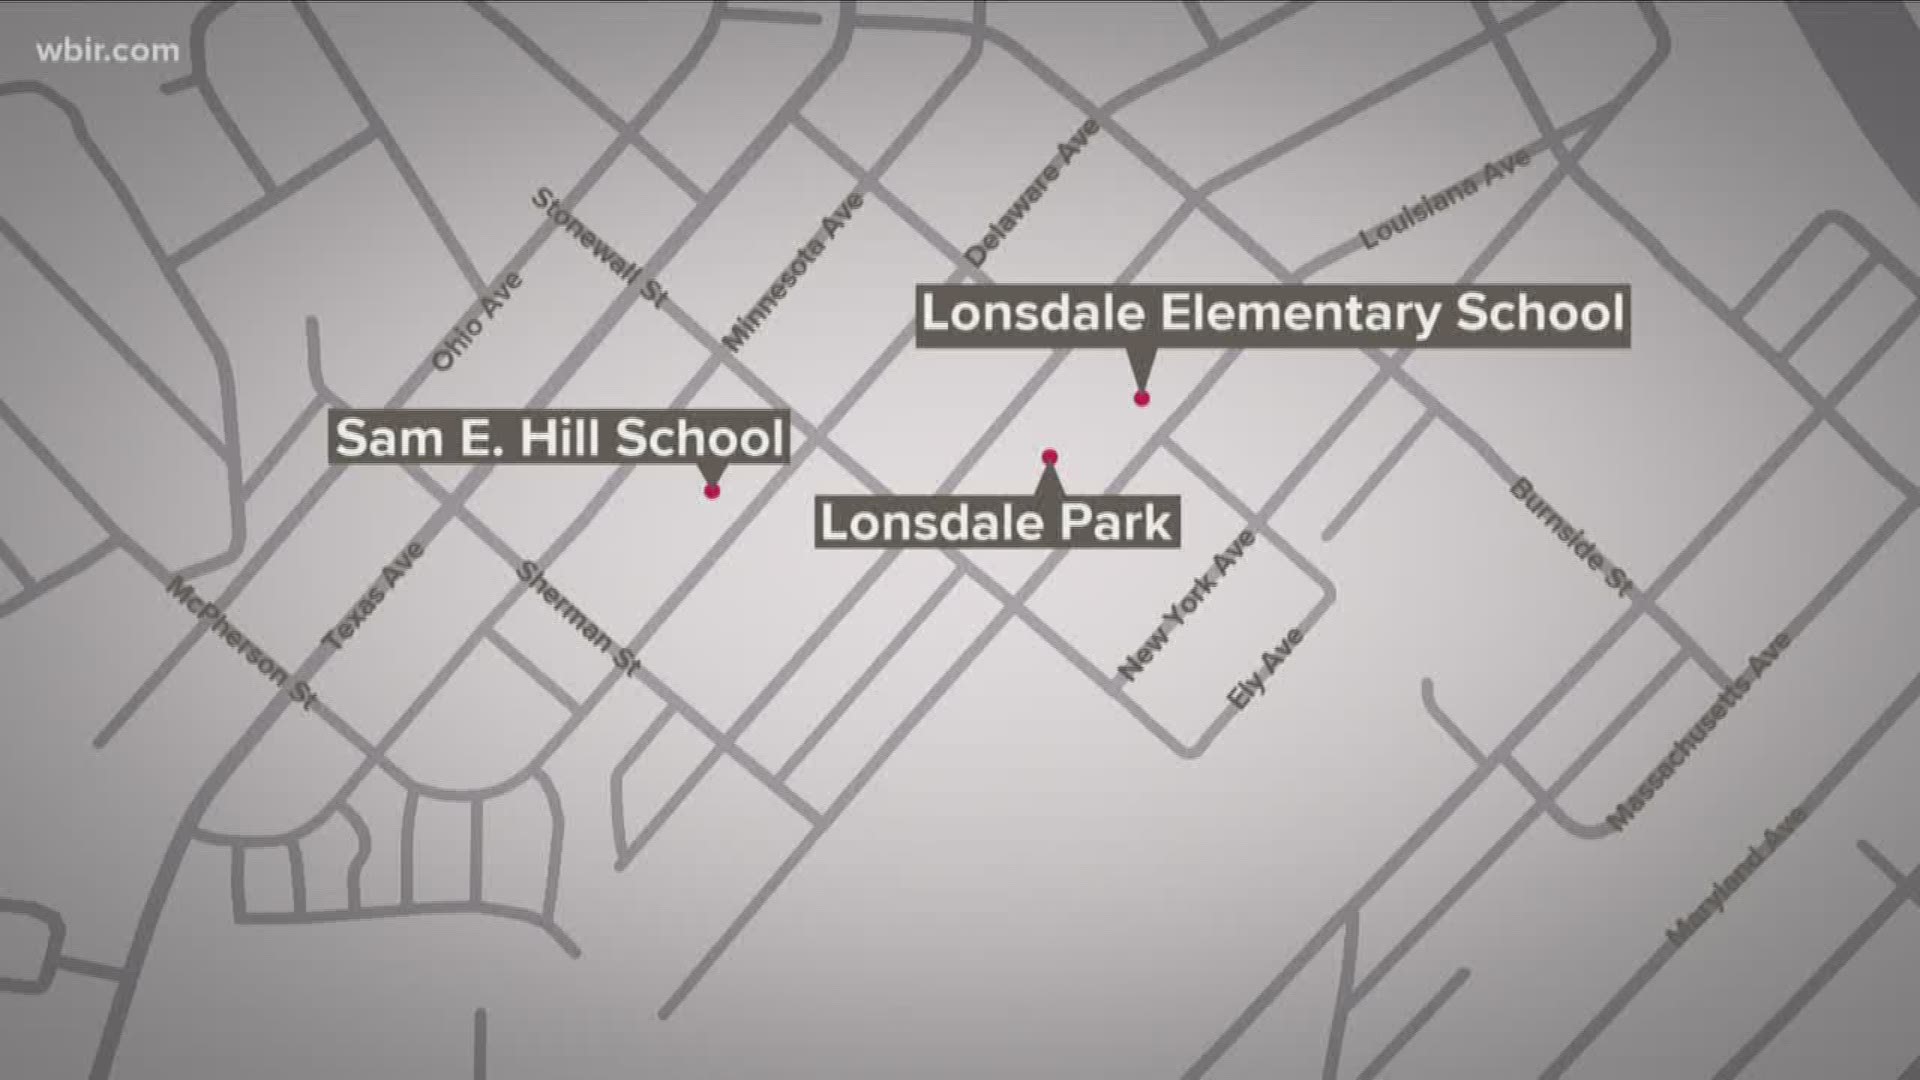 The city of Knoxville and Knox County are considering a plan to swap land in order to build a new Lonsdale Elementary School building.